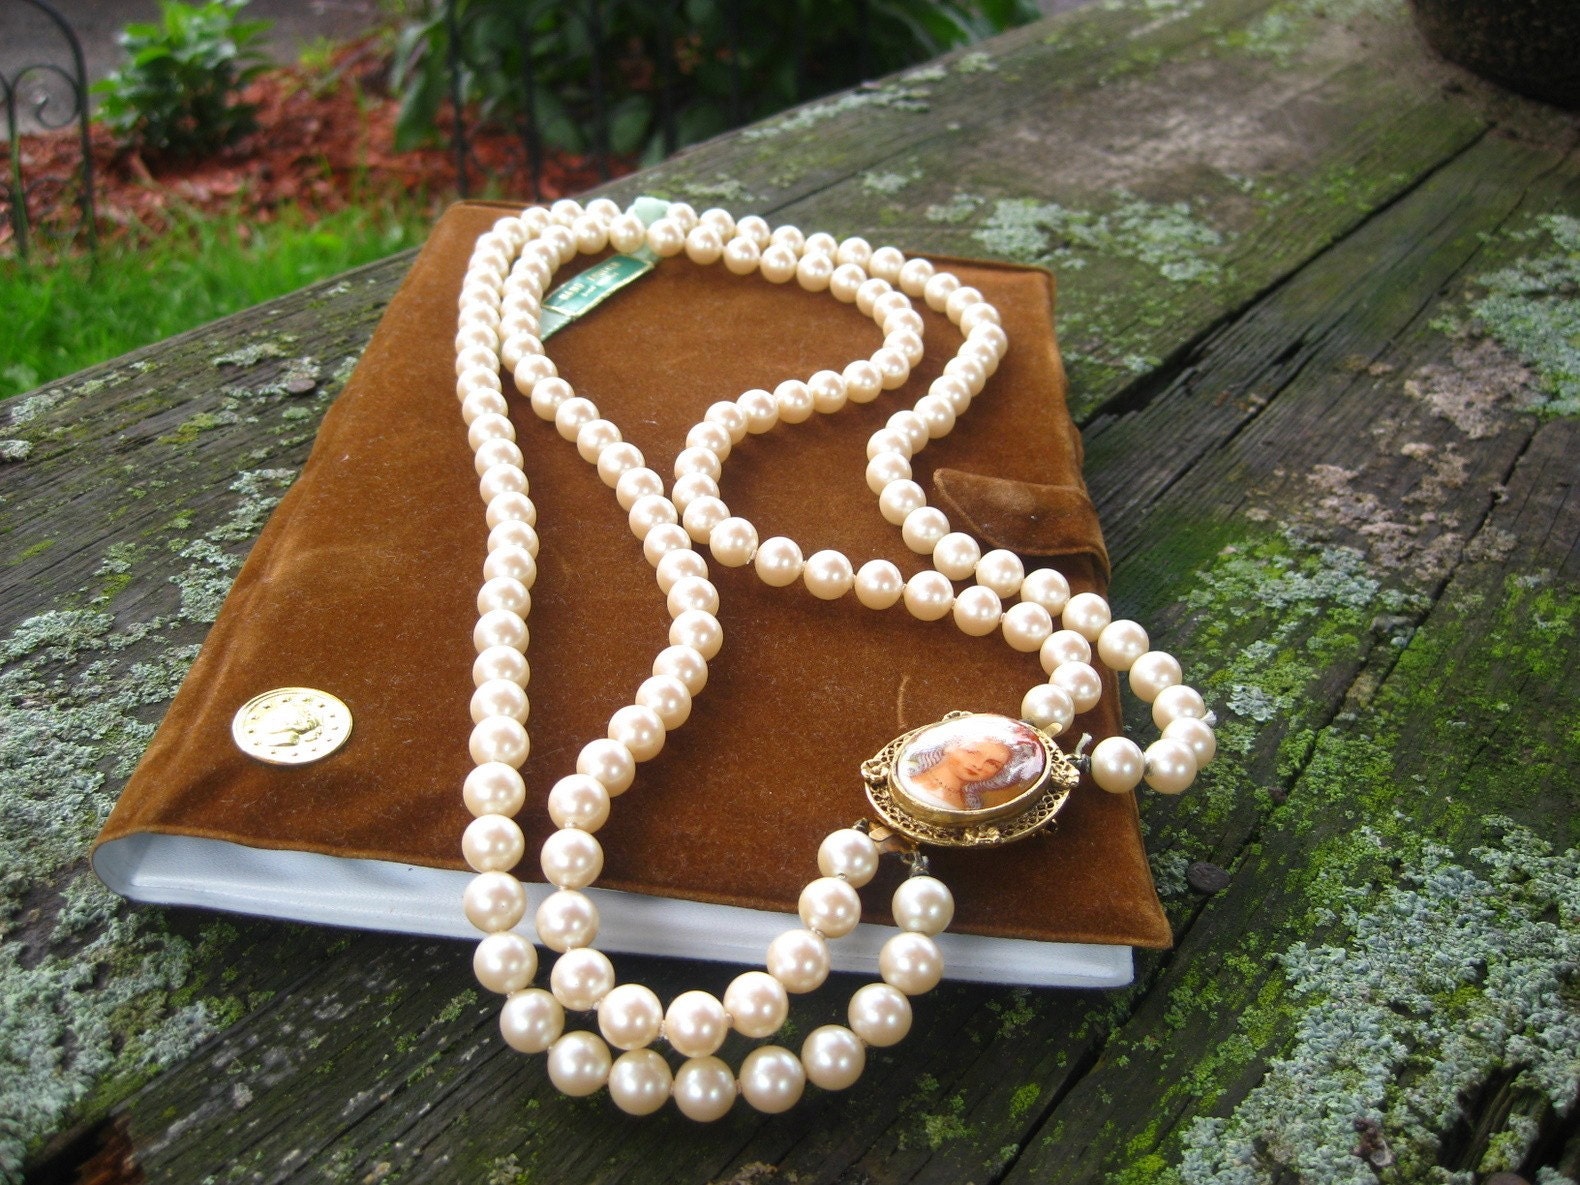 VINTAGE PEARL NECKLACE NEW IN CASE...SALE WAS 45.00 NOW 38.00...jvw